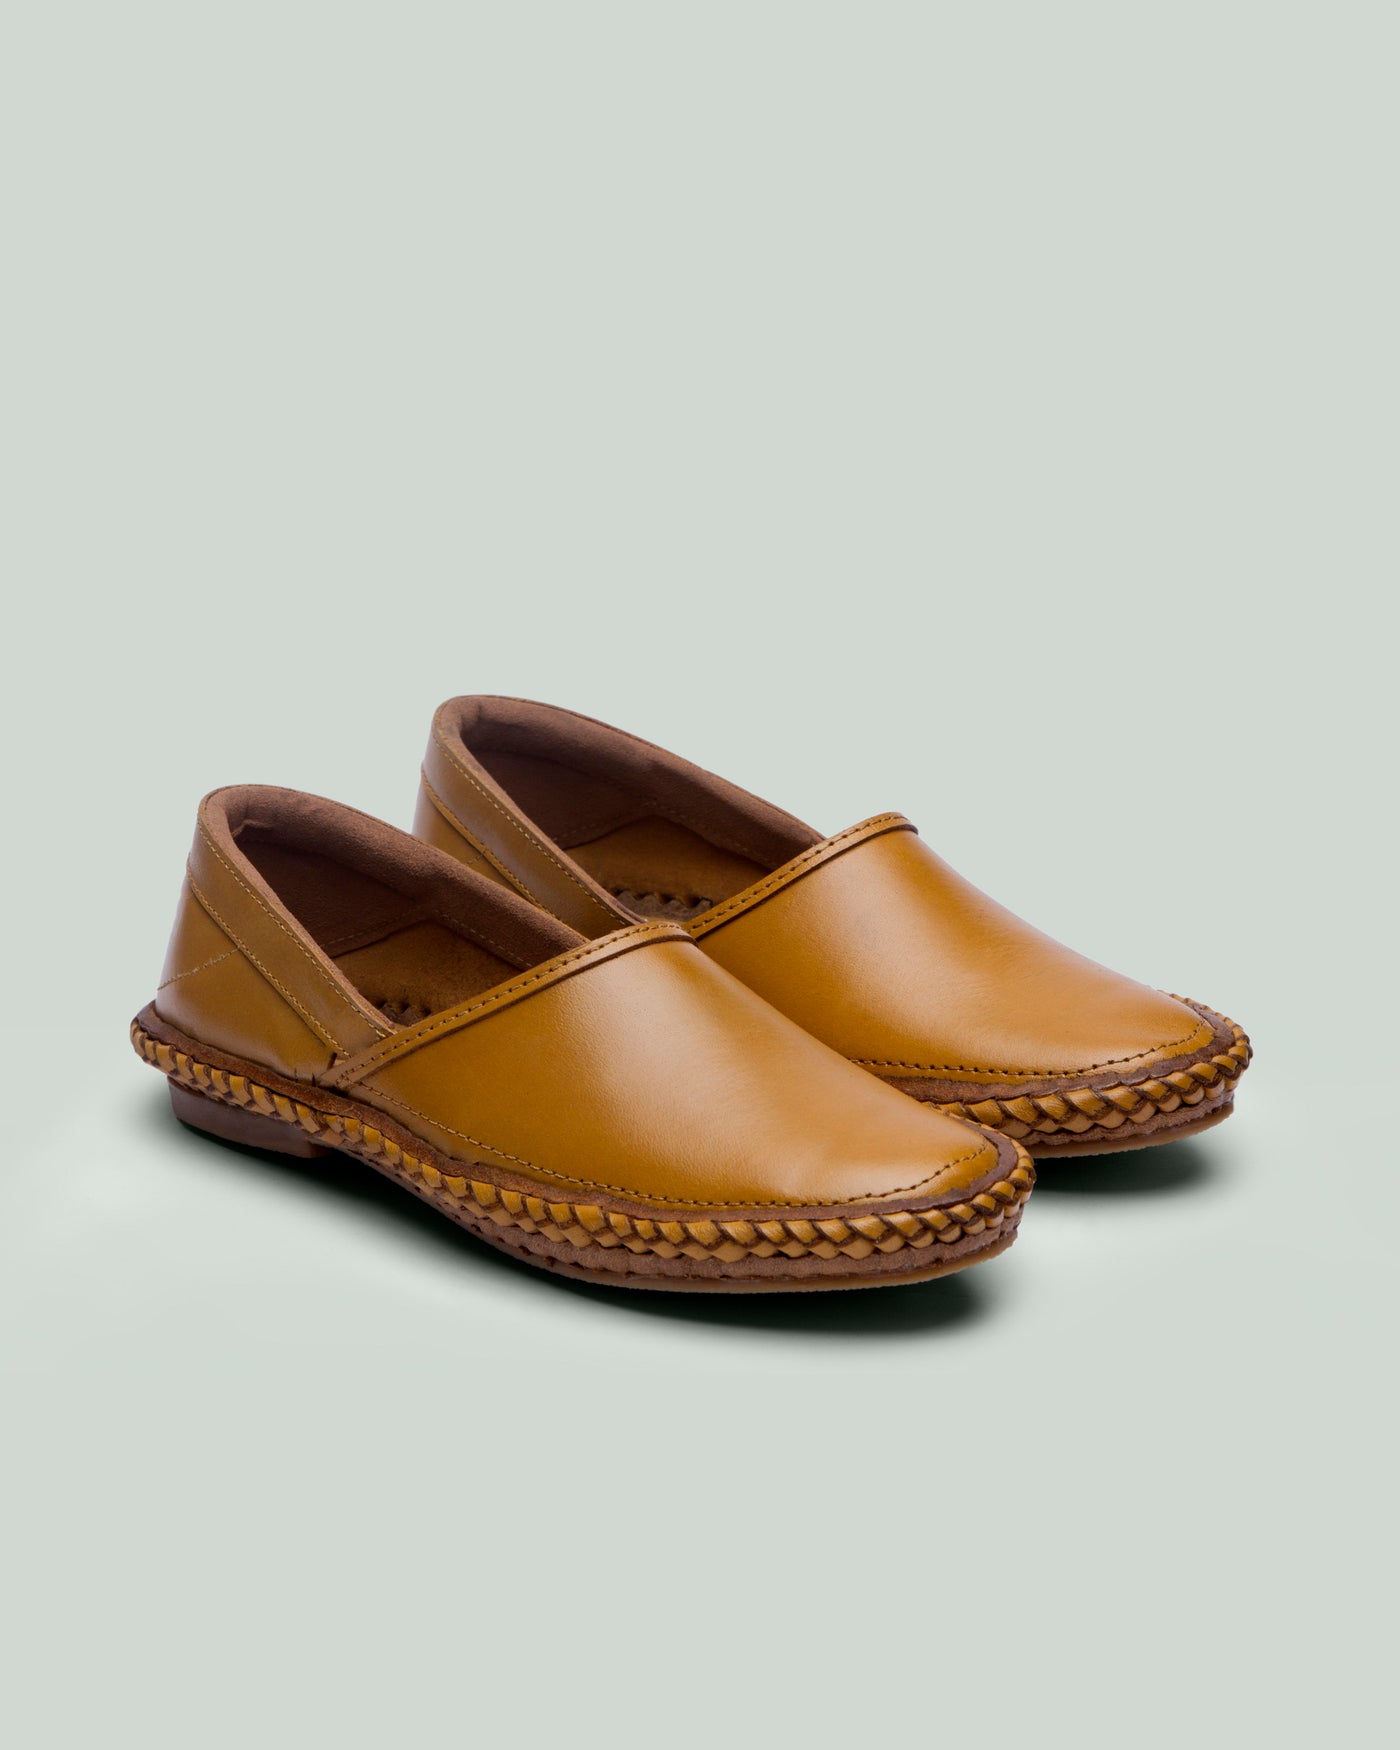 Fireworkshouse-handmade-leather-shoes-TYCOON NATURAL